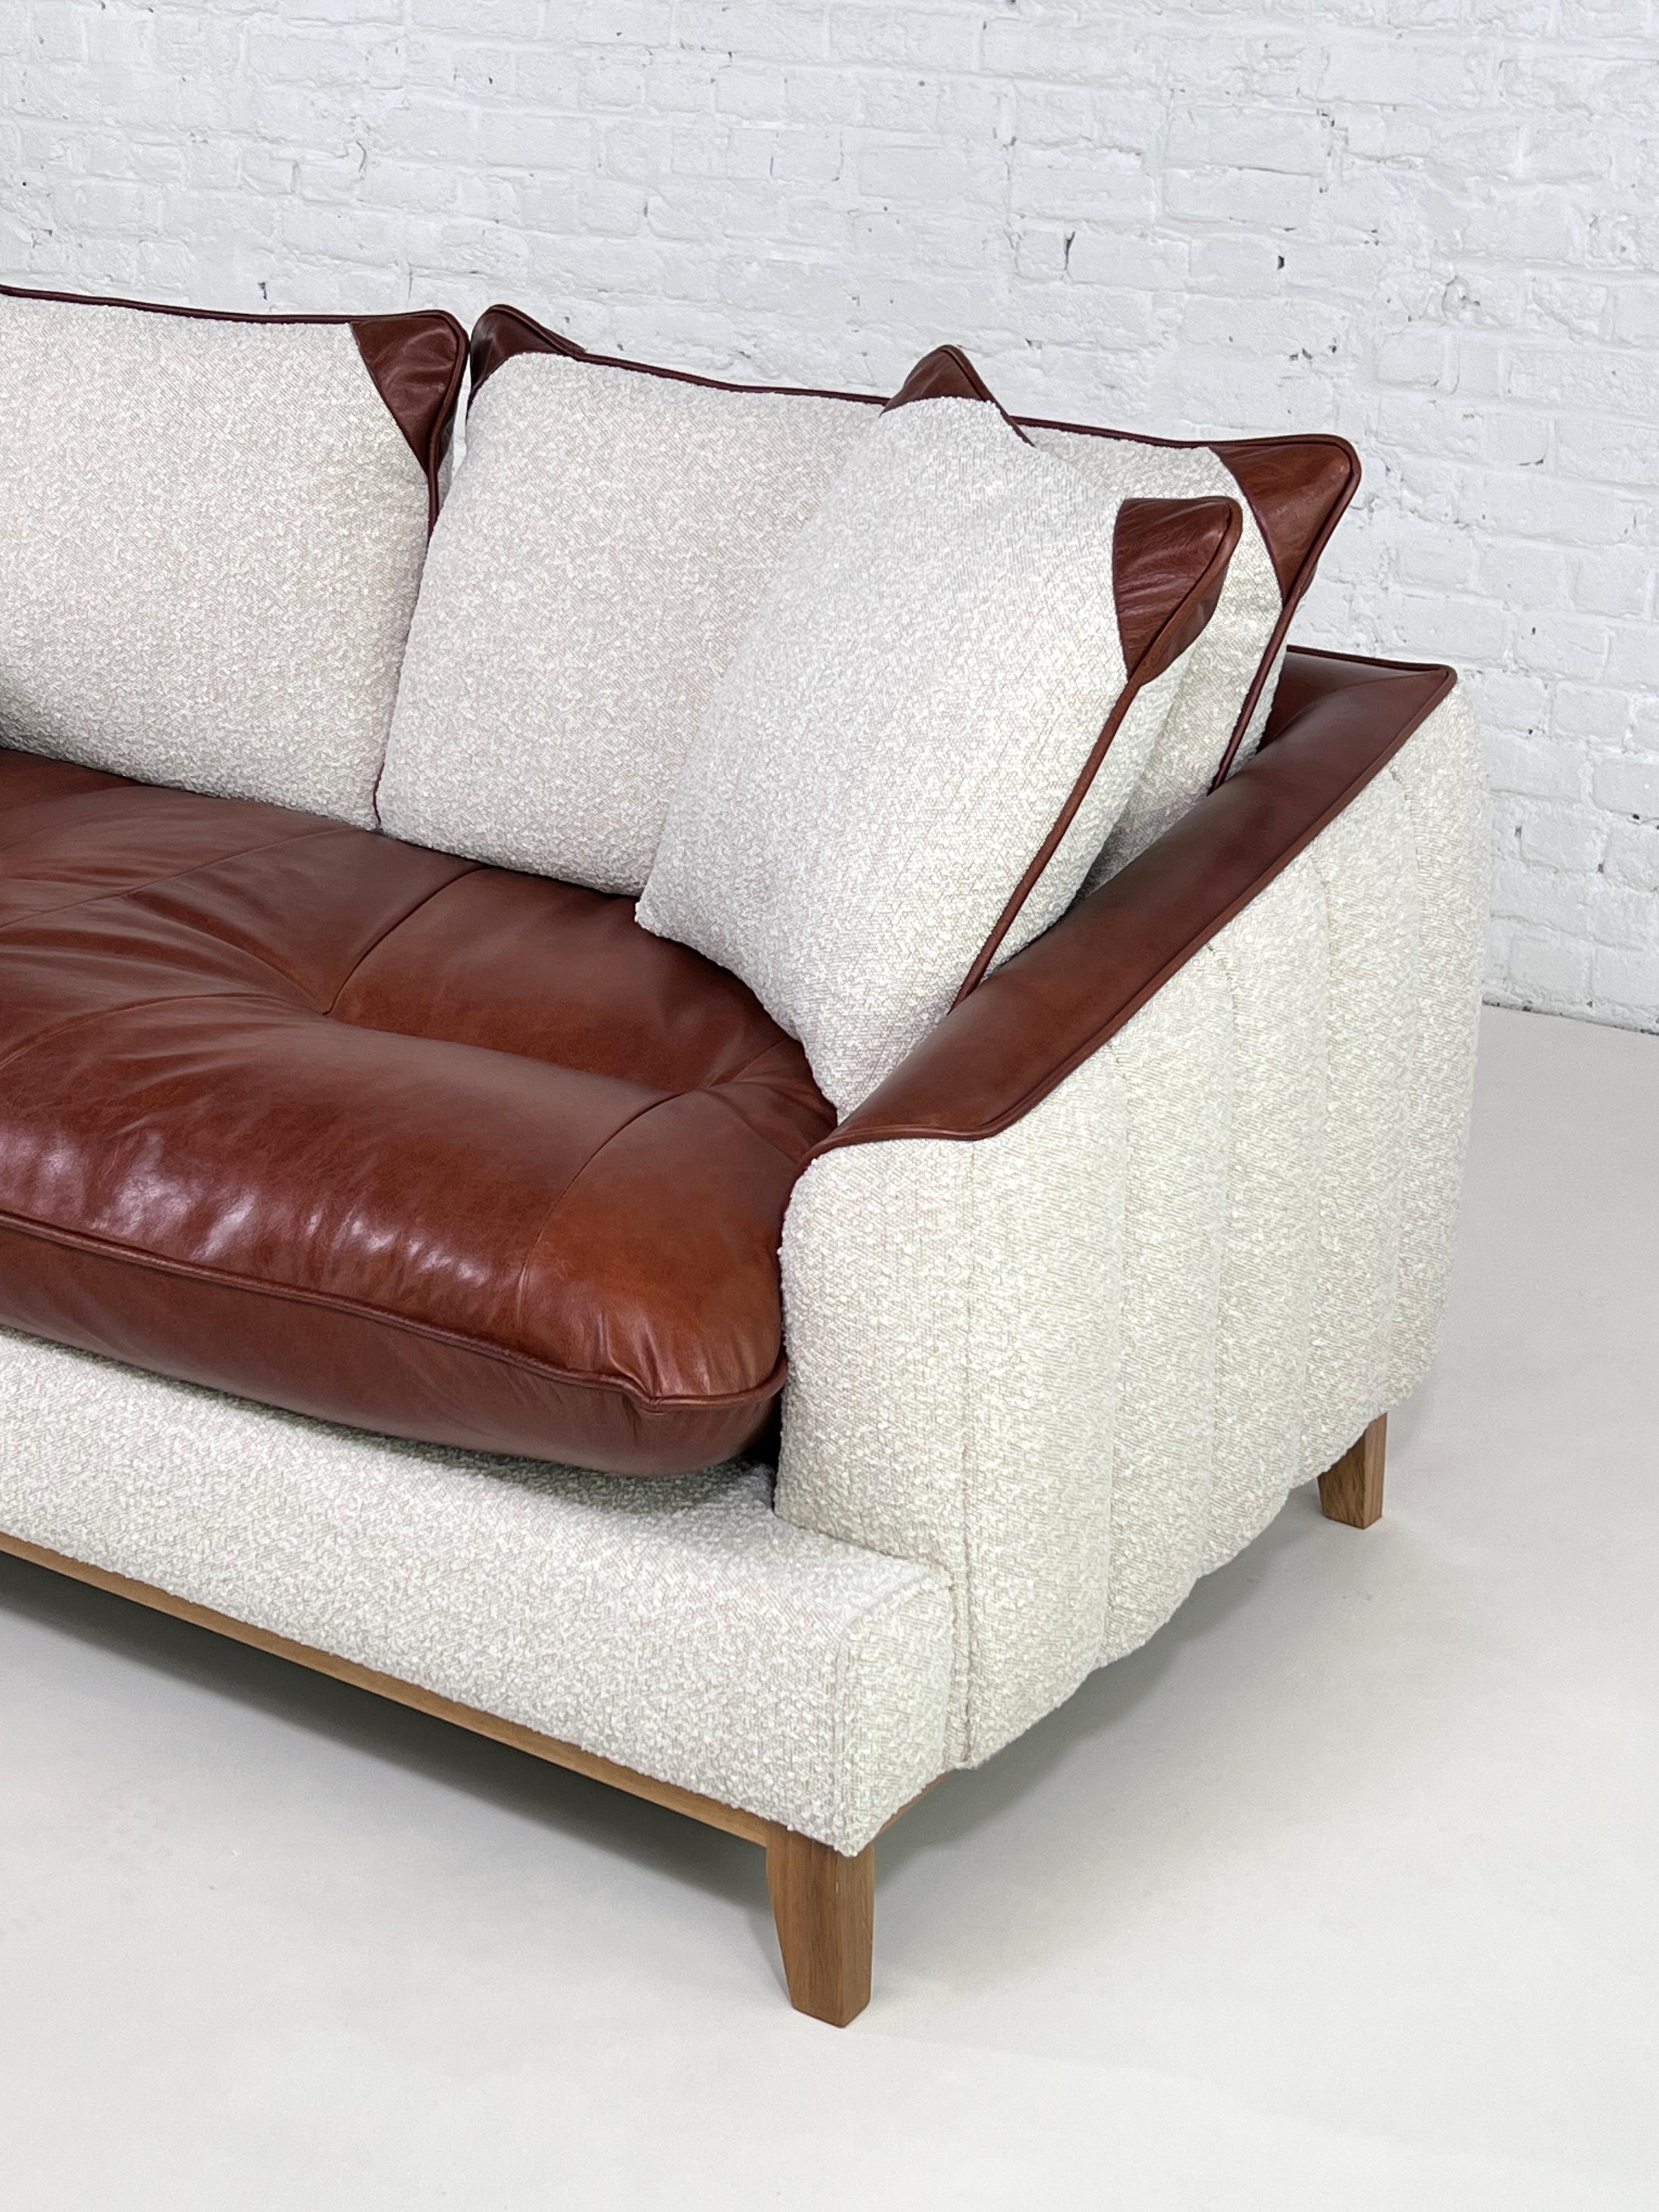 Contemporary Mcm and Scandinavian Design Style Cognac Leather and Beige Bouclé Fabric Sofa For Sale